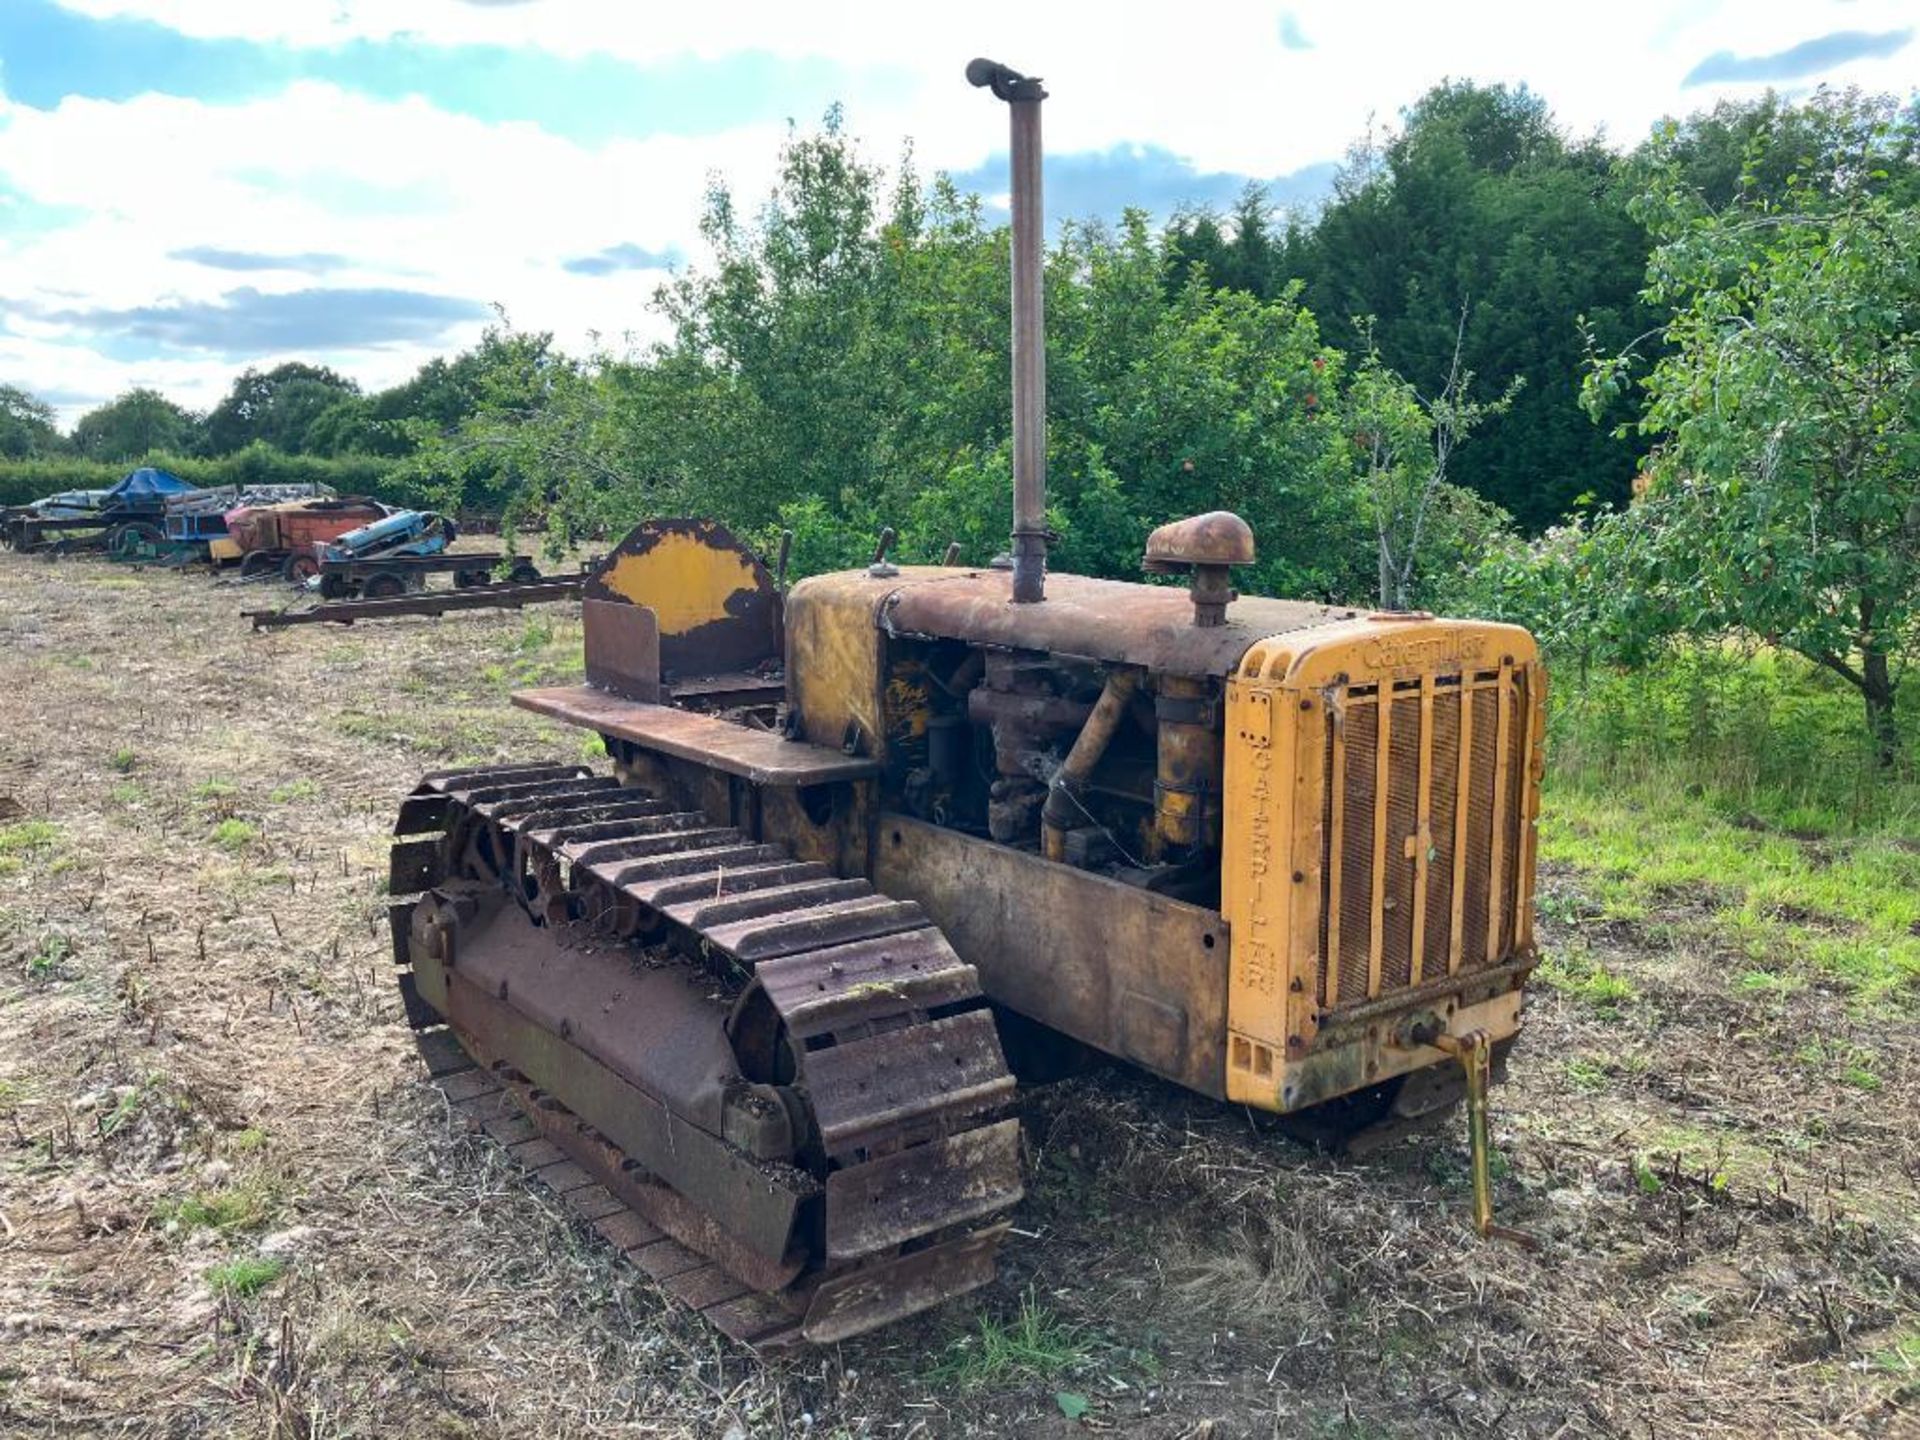 1939 Caterpillar R4 metal tracked crawler with 16" tracks and swinging drawbar. Serial No: 6G1021WS - Image 10 of 14